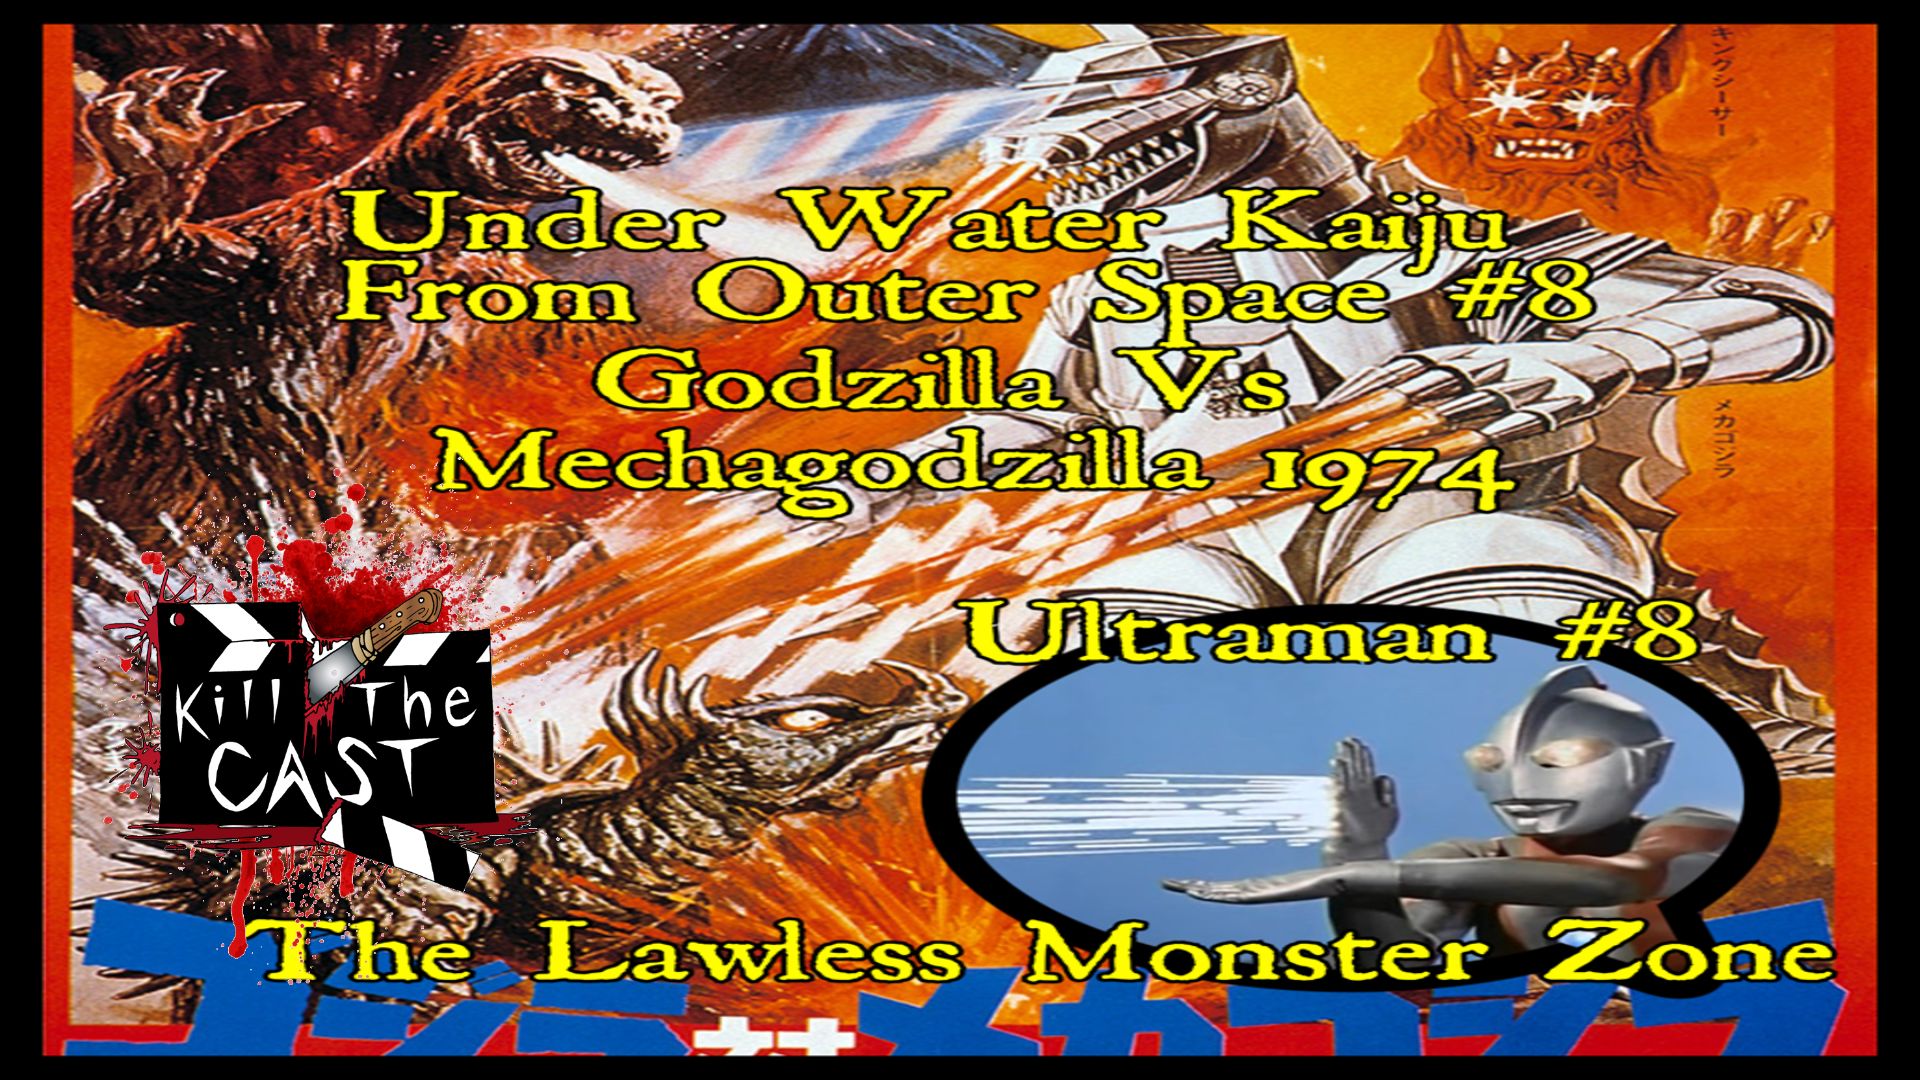 Underwater Kaiju From Outer Space #2- Godzilla vs Gigan